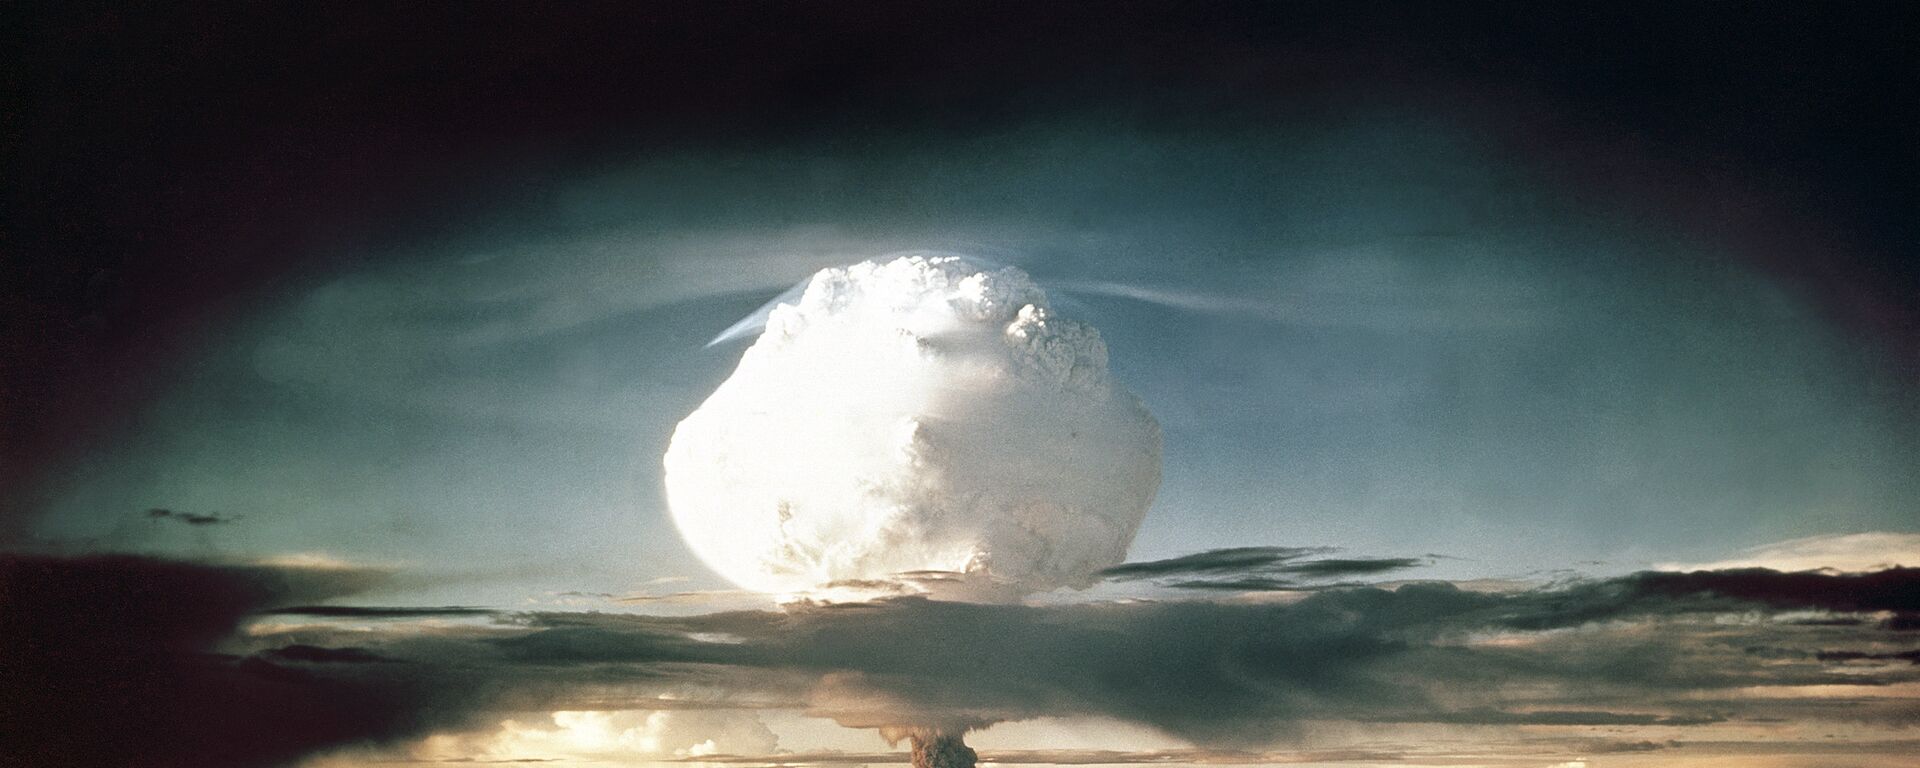 The mushroom cloud from Ivy Mike (codename given to the test) rises above the Pacific Ocean over the Enewetak Atoll in the Marshall Islands on November 1, 1952 at 7:15 am (local time) - Sputnik International, 1920, 23.03.2023